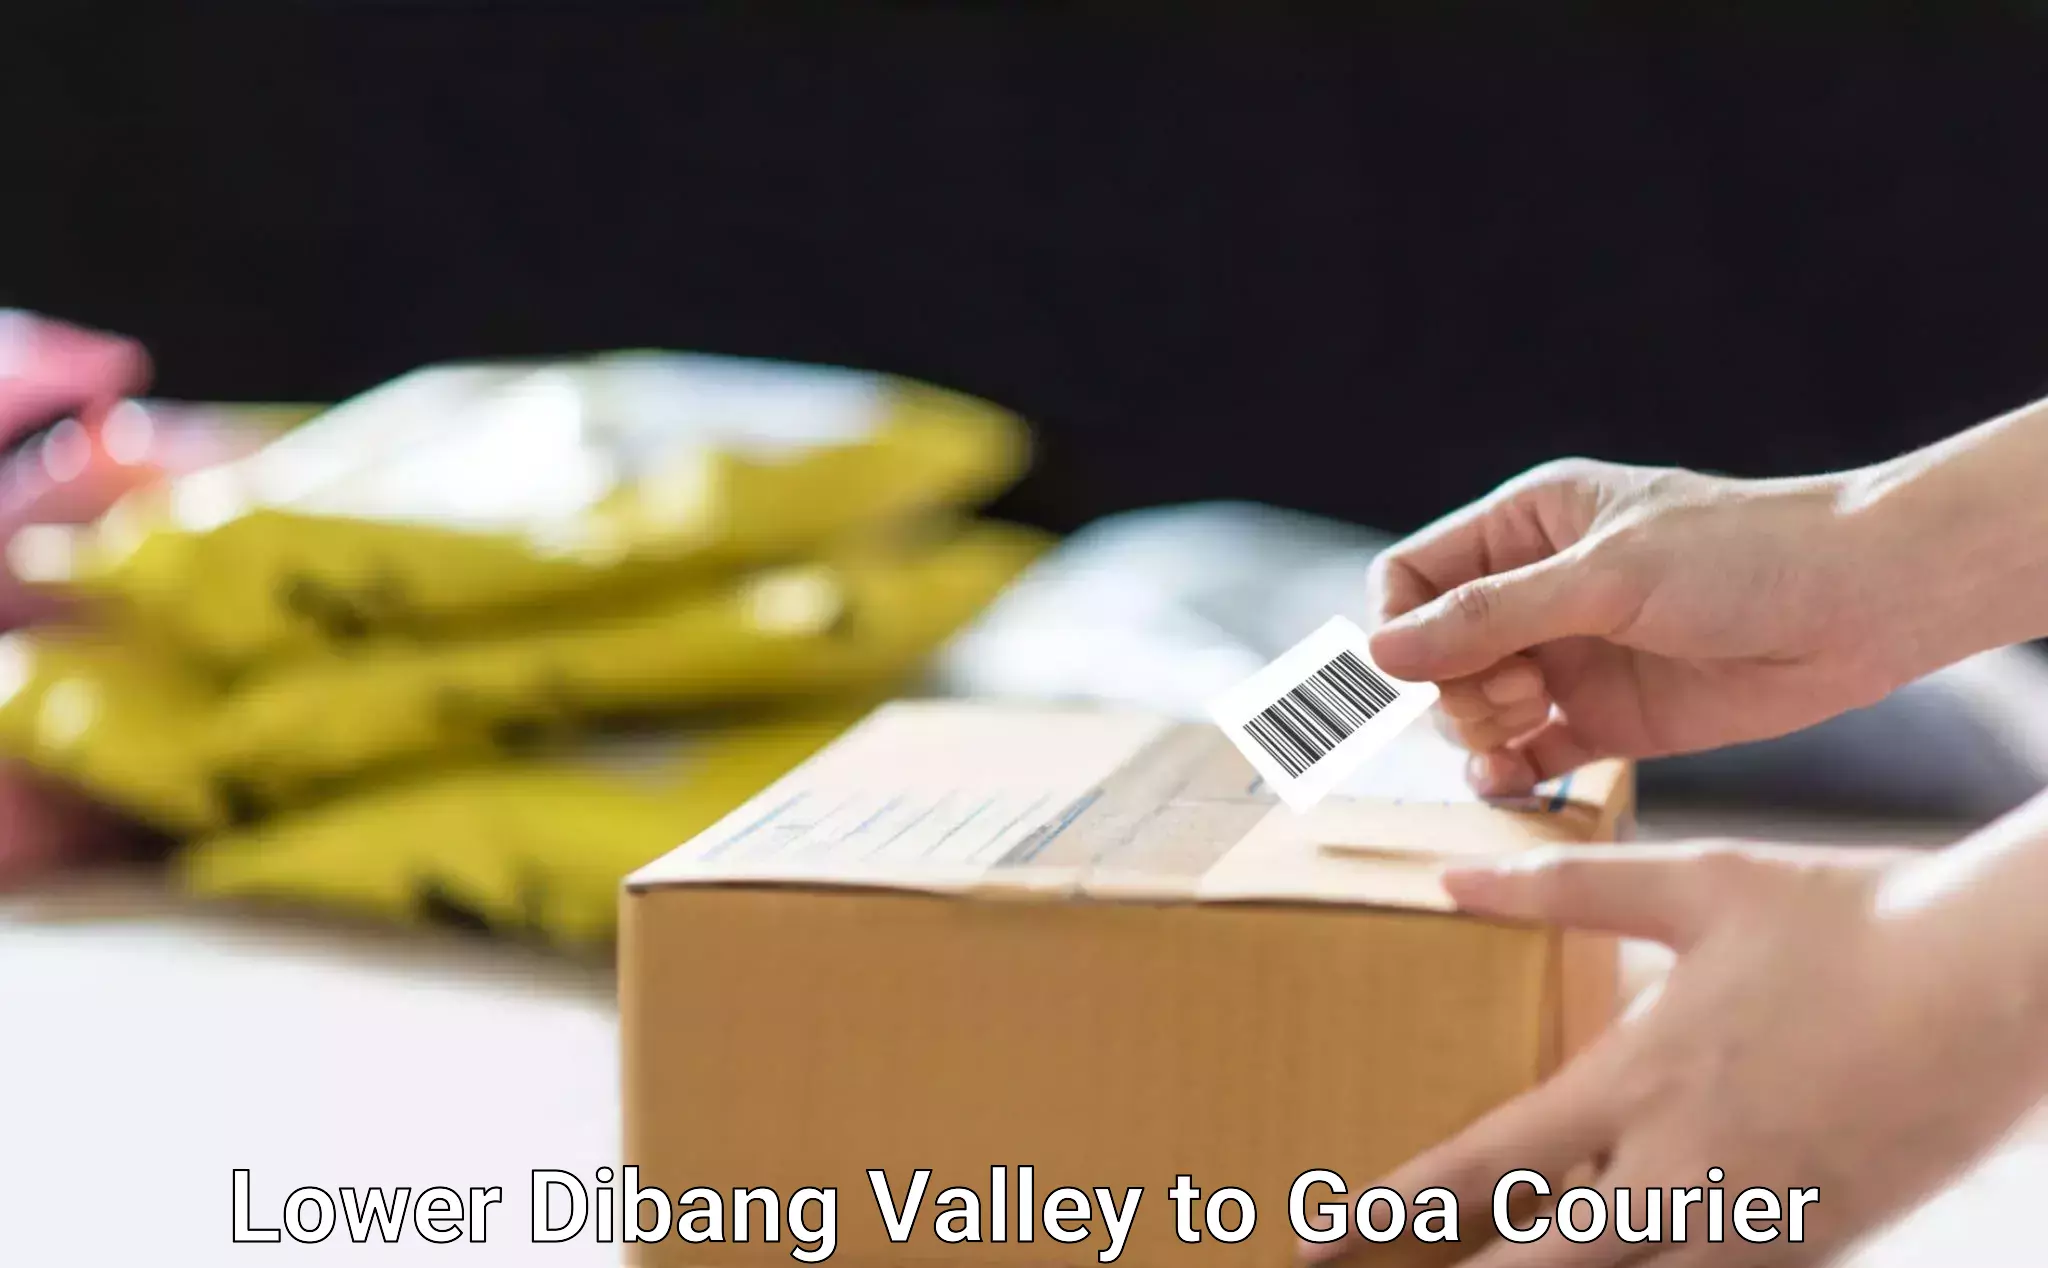 User-friendly delivery service Lower Dibang Valley to Goa University